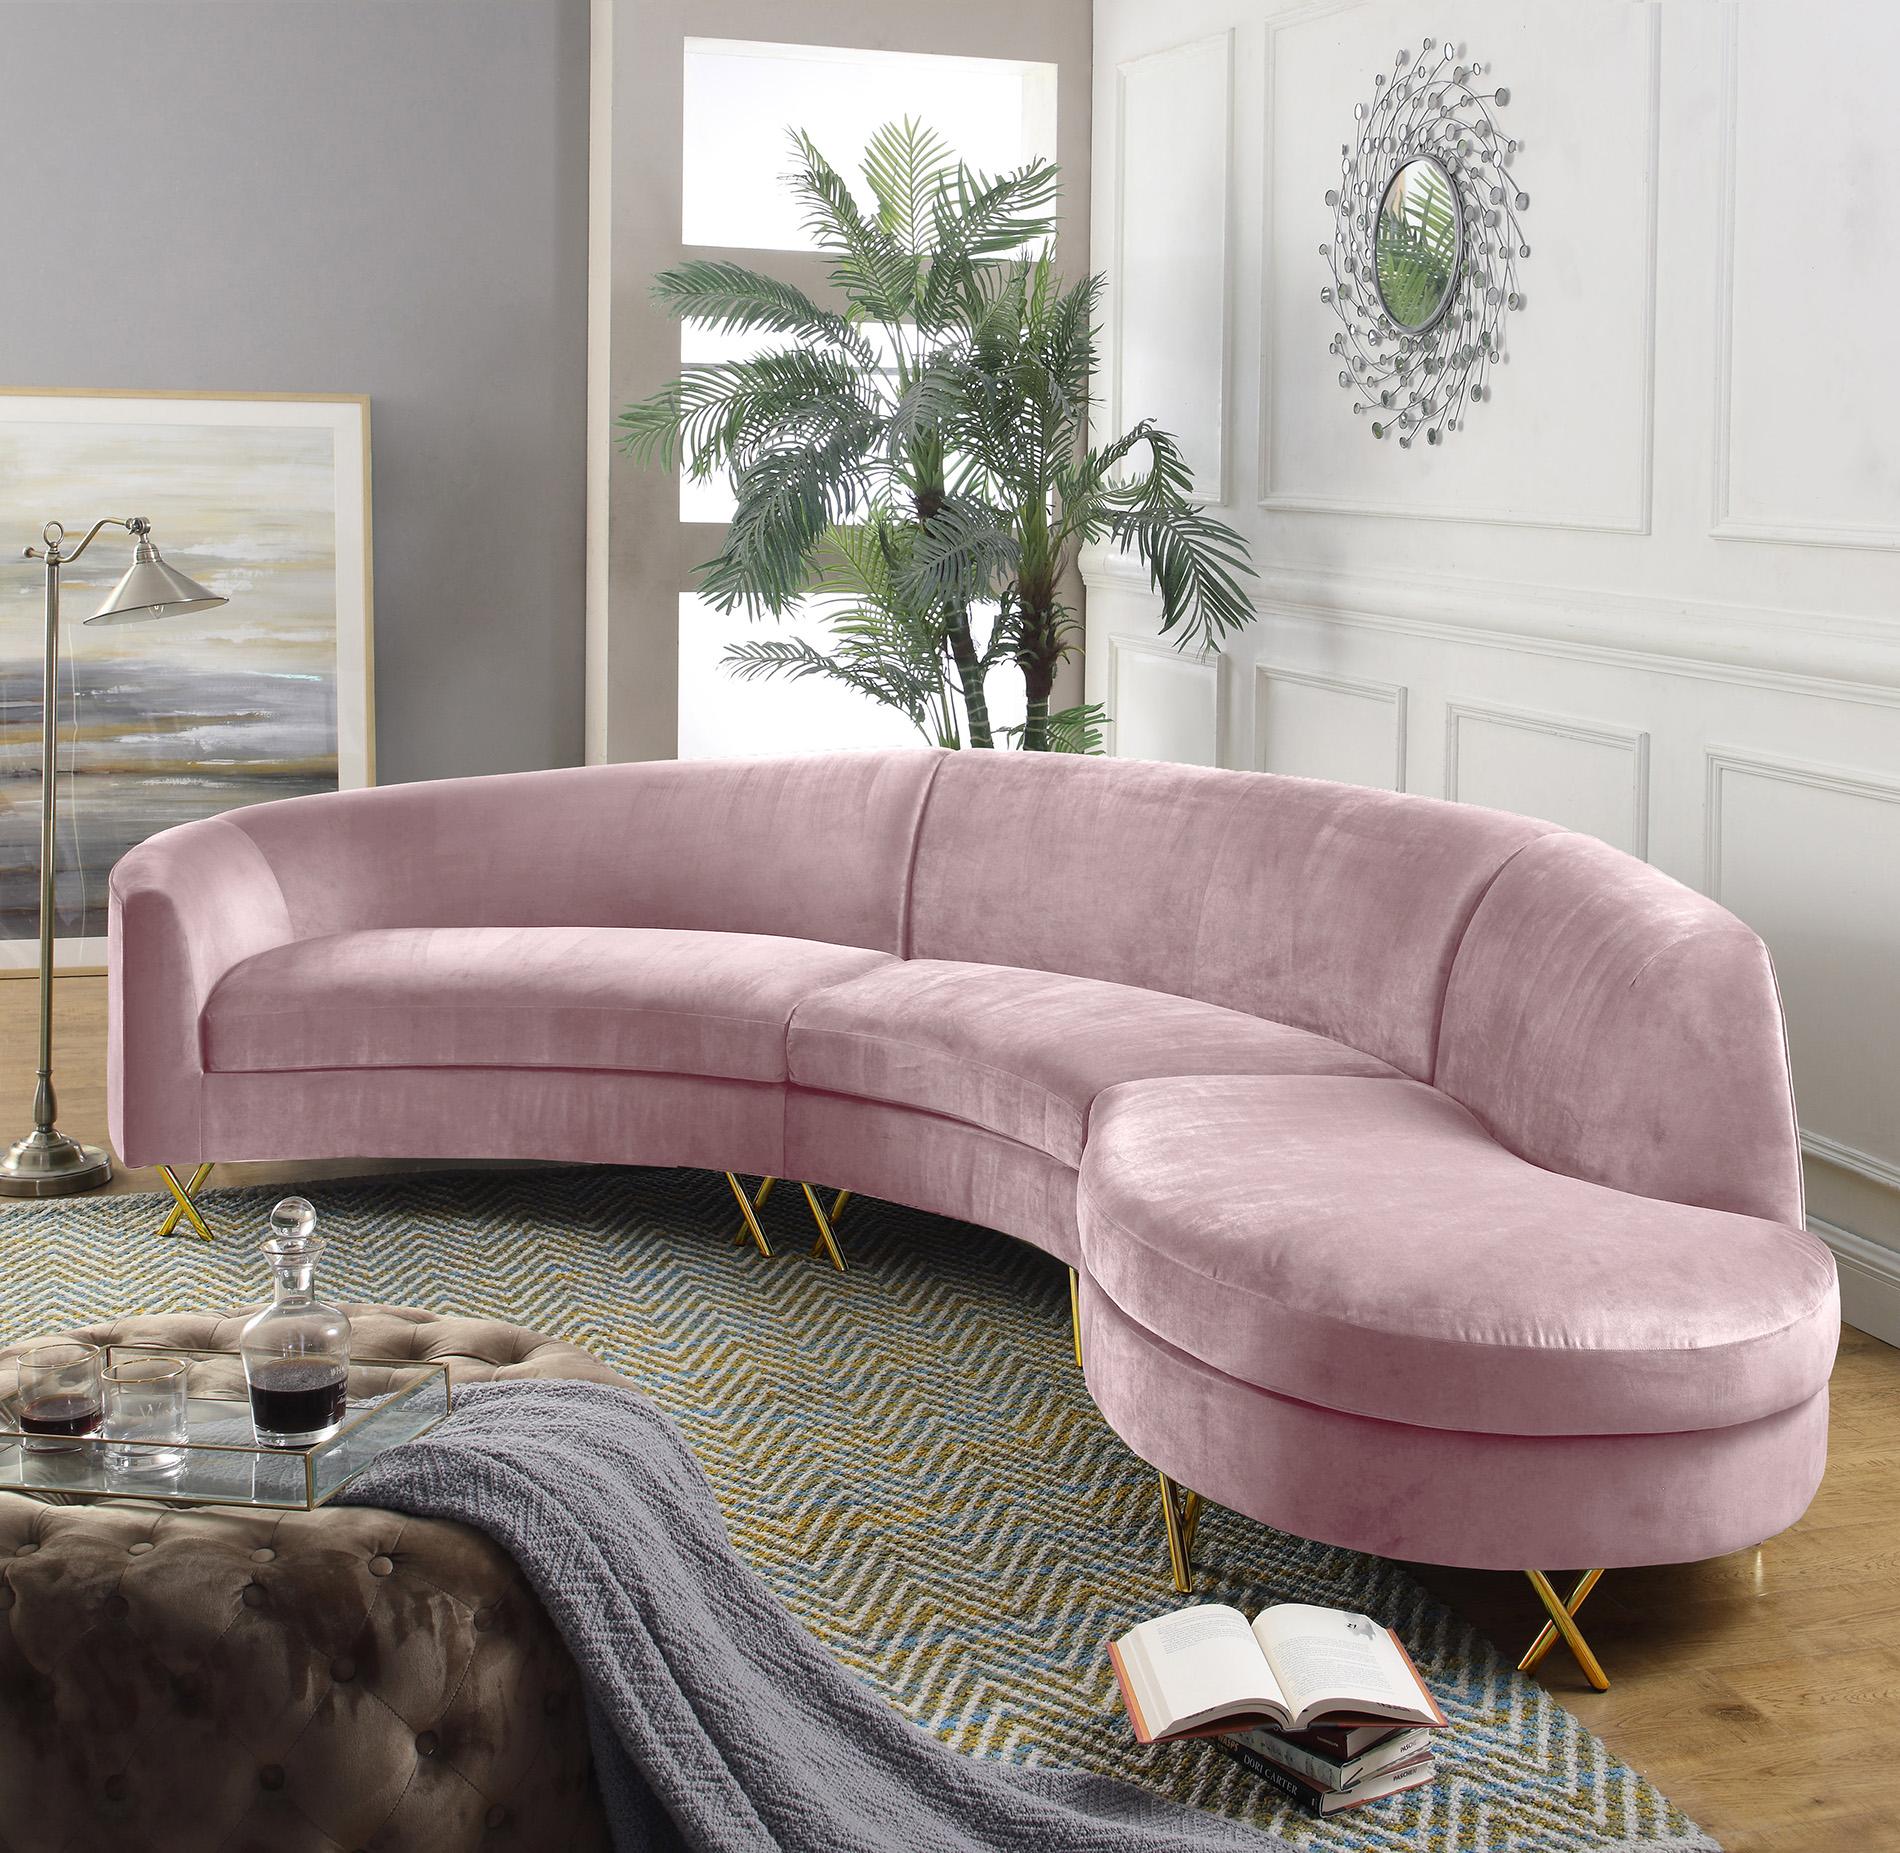 Contemporary, Modern Sectional Sofa SERPENTINE 671Pink 671Pink-Sectional in Pink Velvet